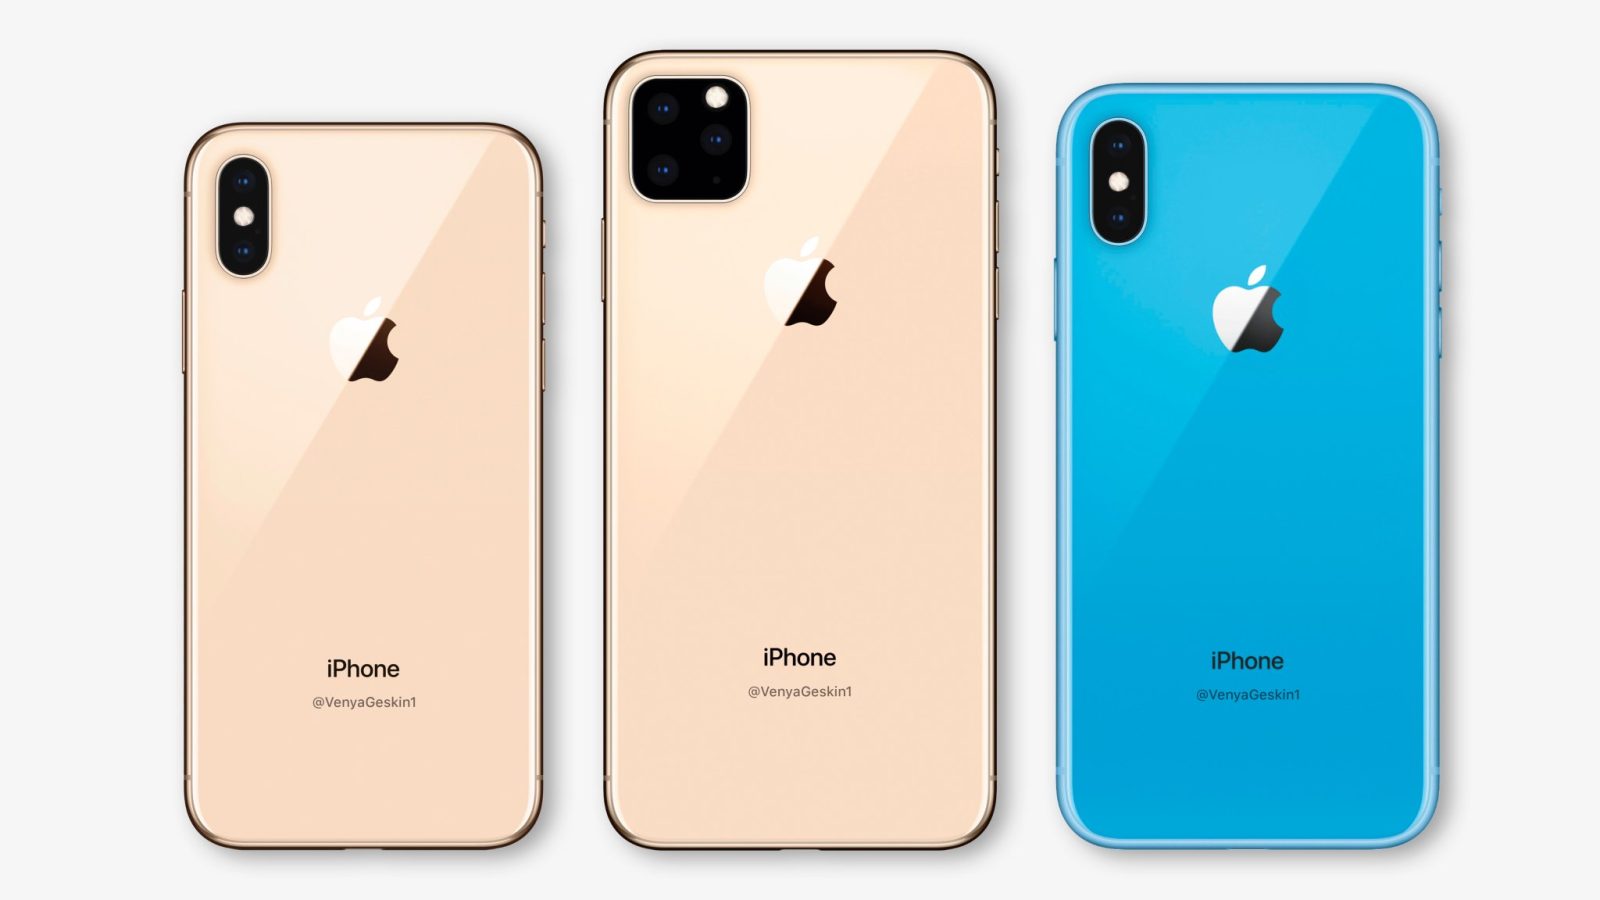 iPhone 11 and iPhone XR successor